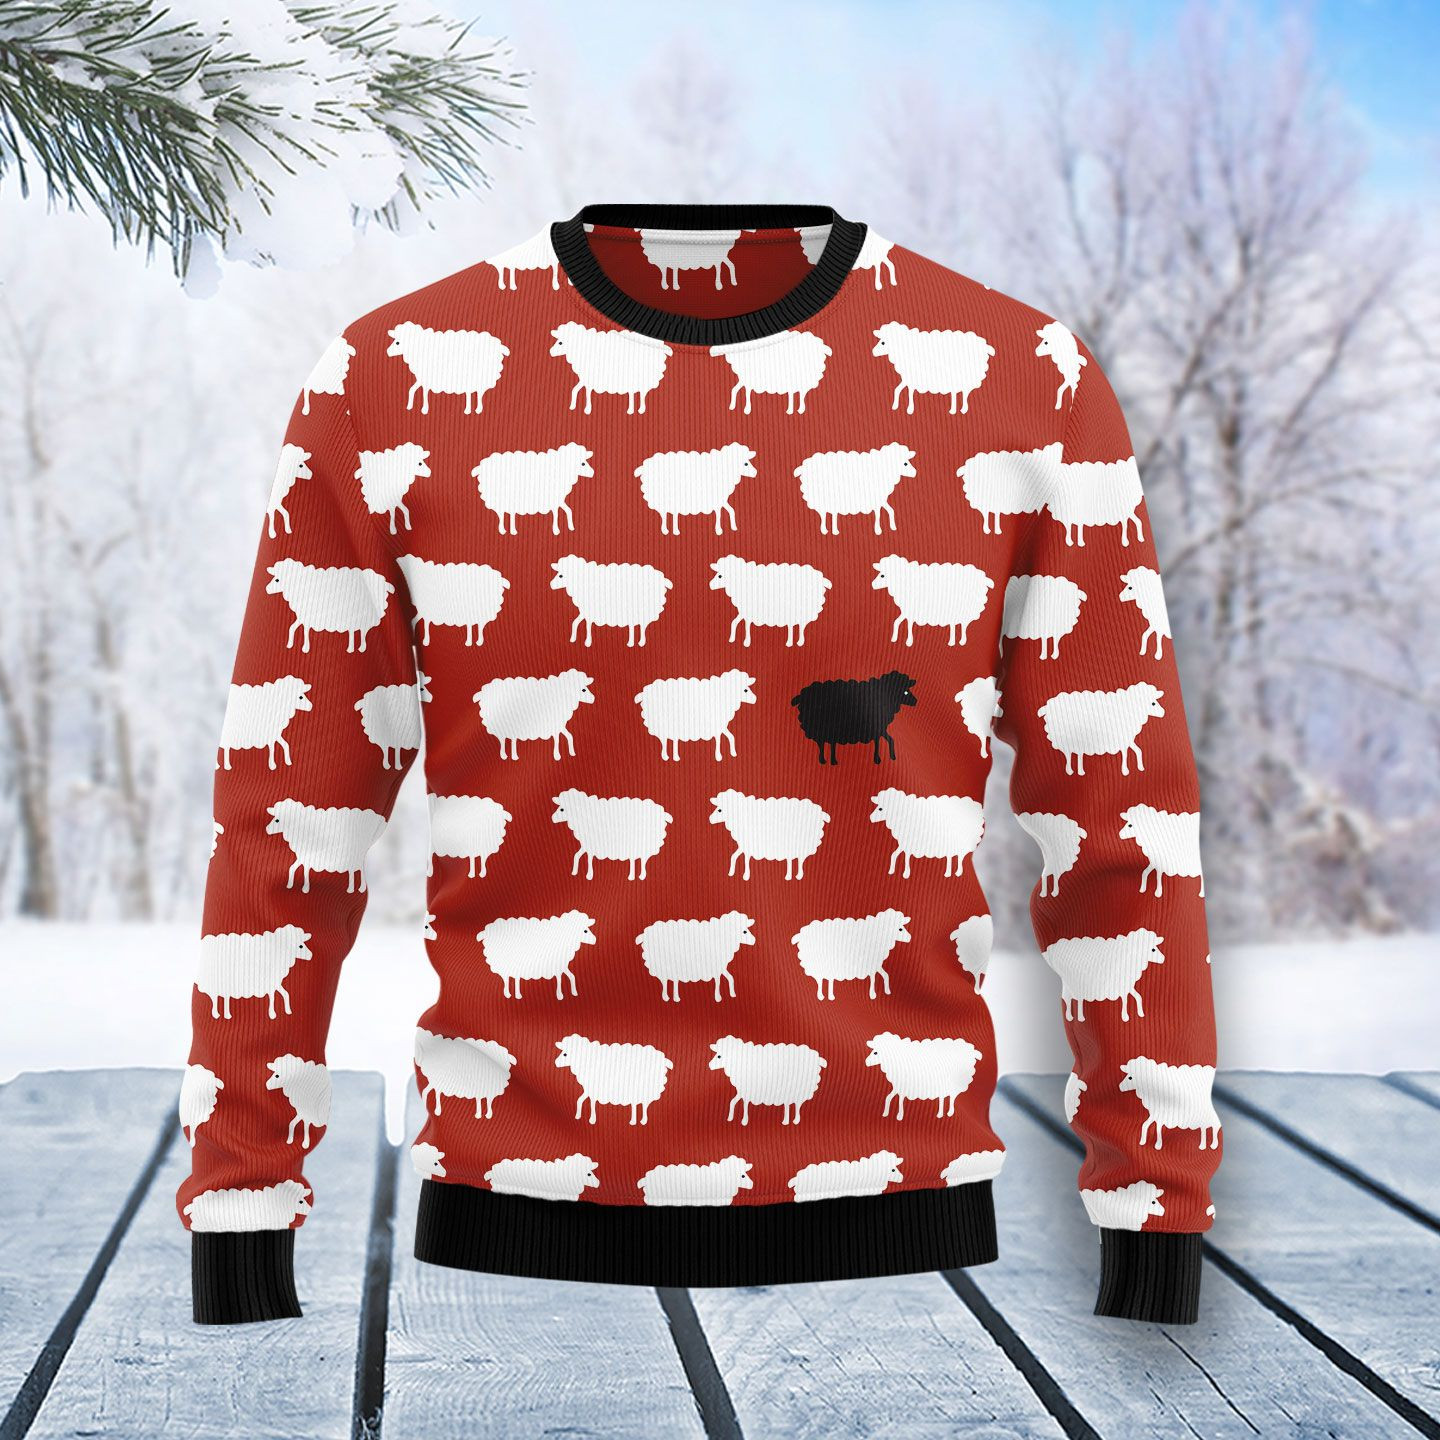 Sheep Black And White Ugly Christmas Sweater Ugly Sweater For Men Women